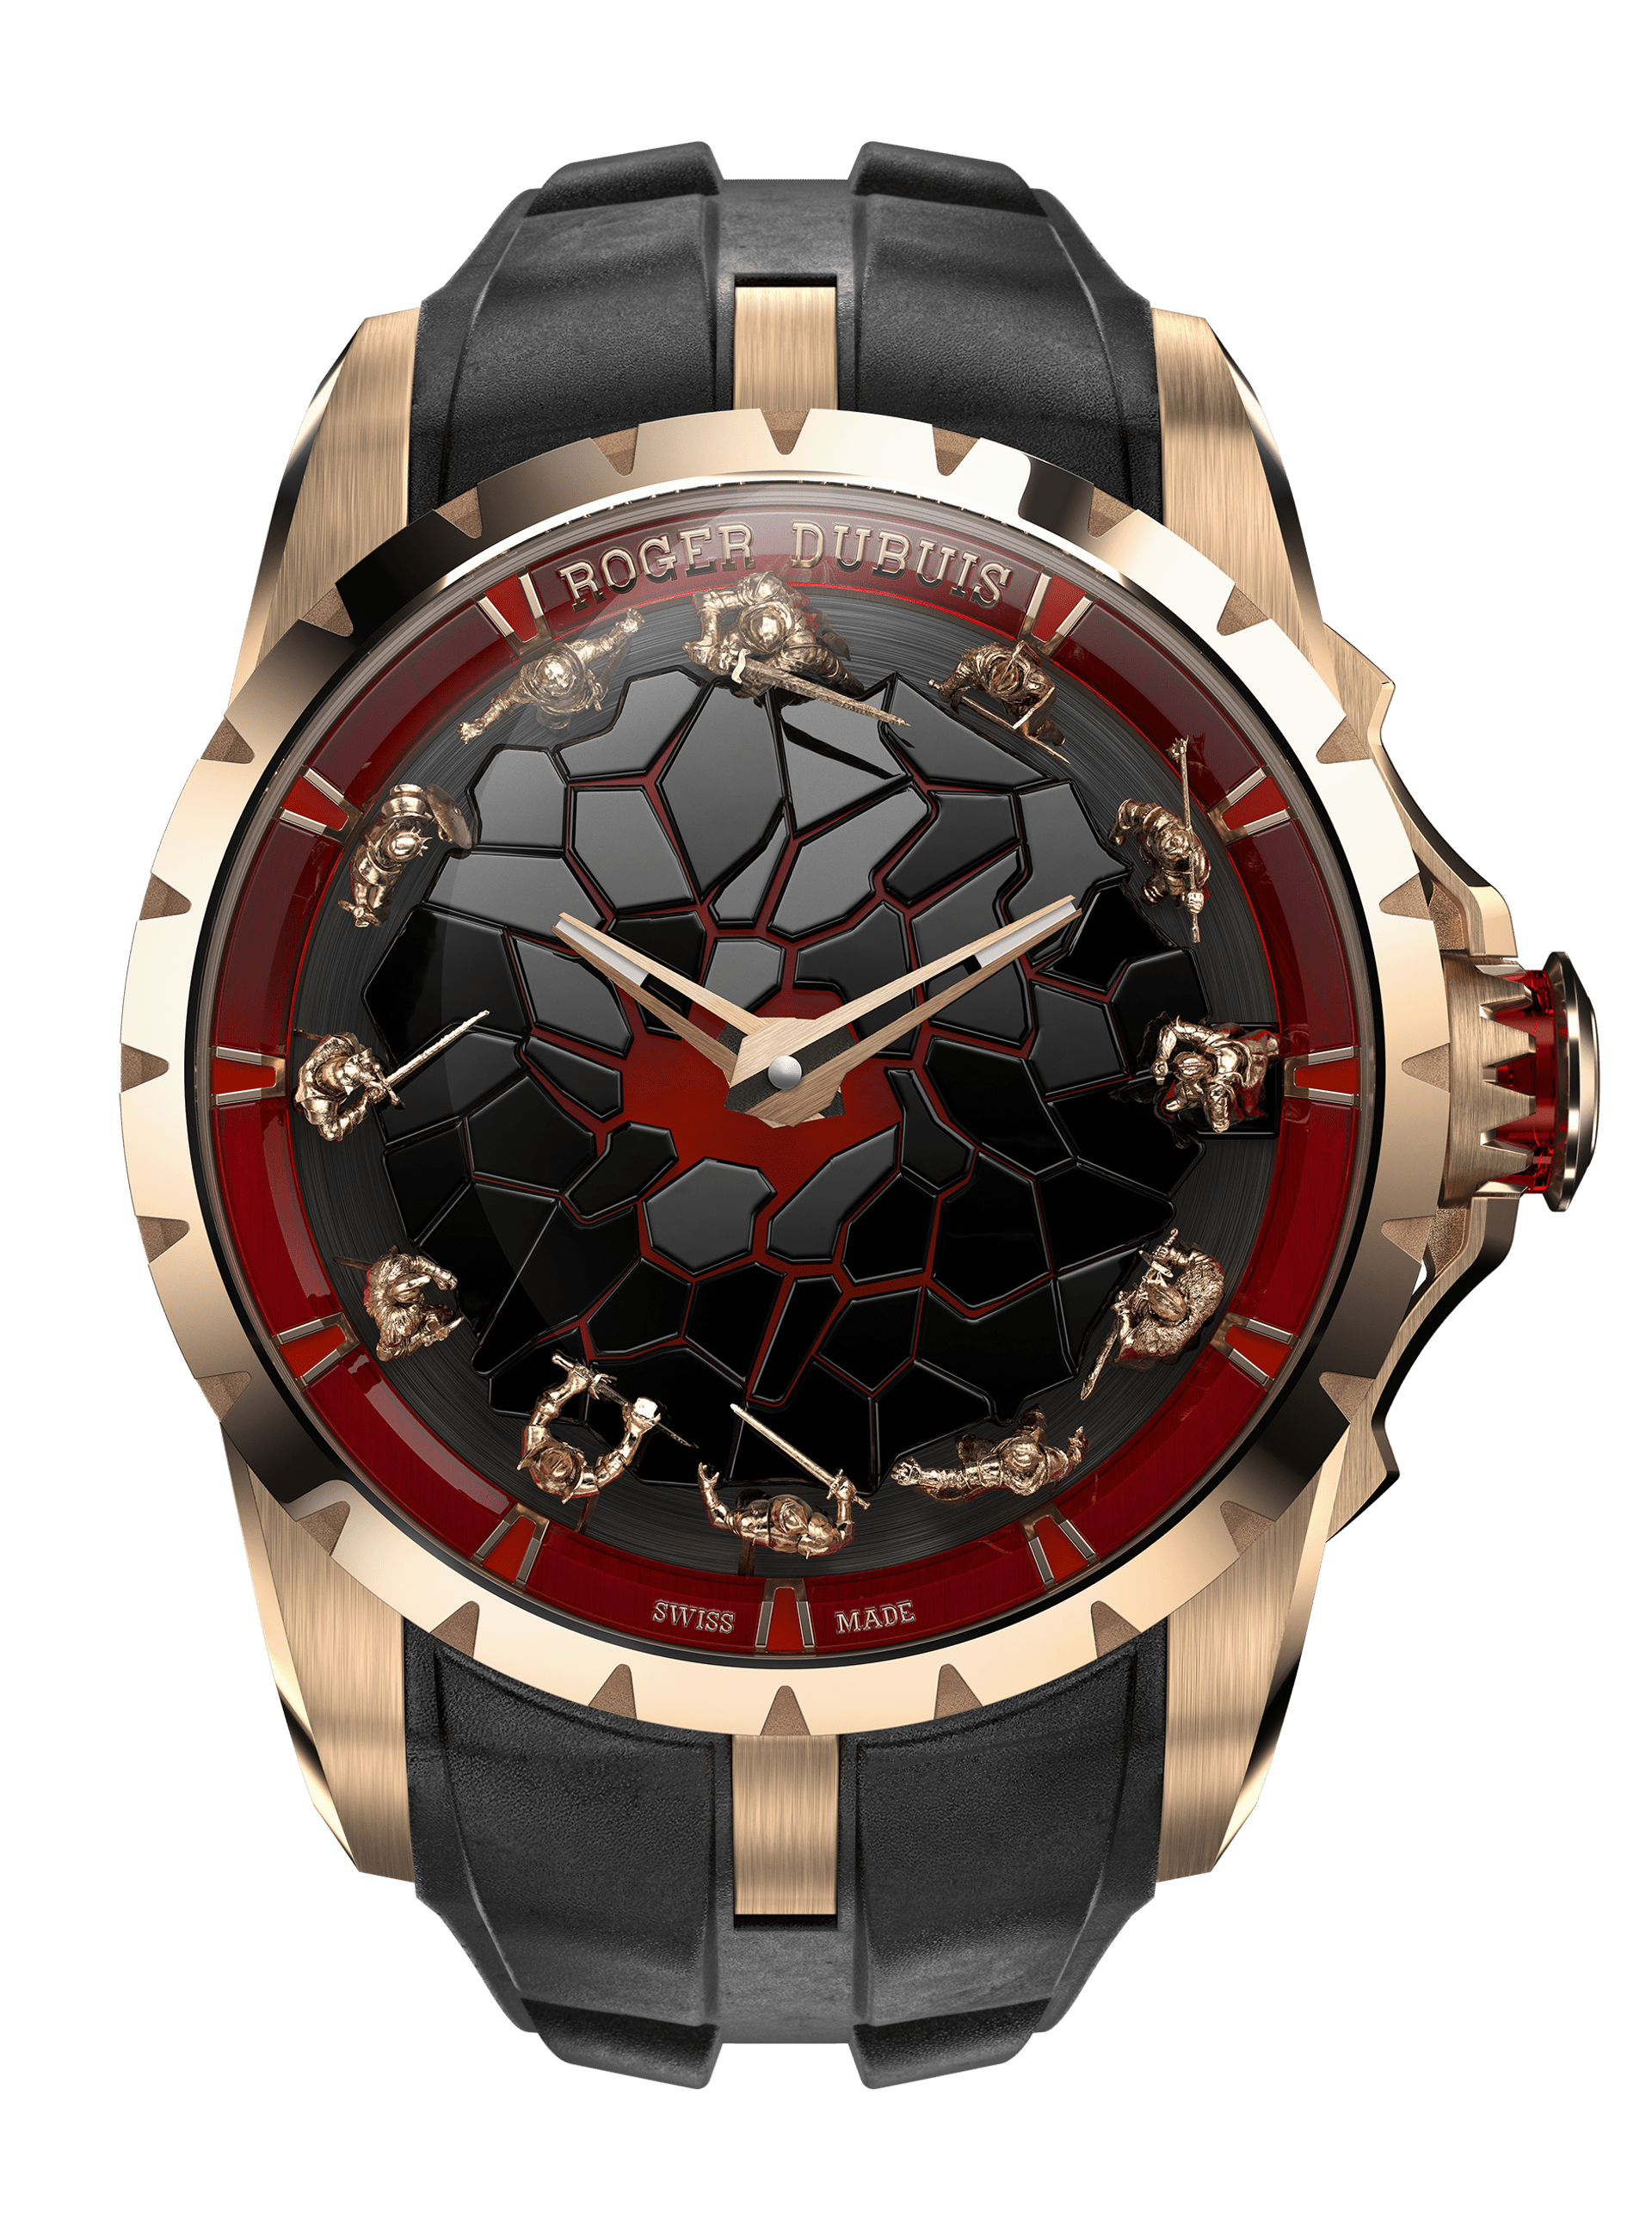 Roger dubuis - roger dubuis